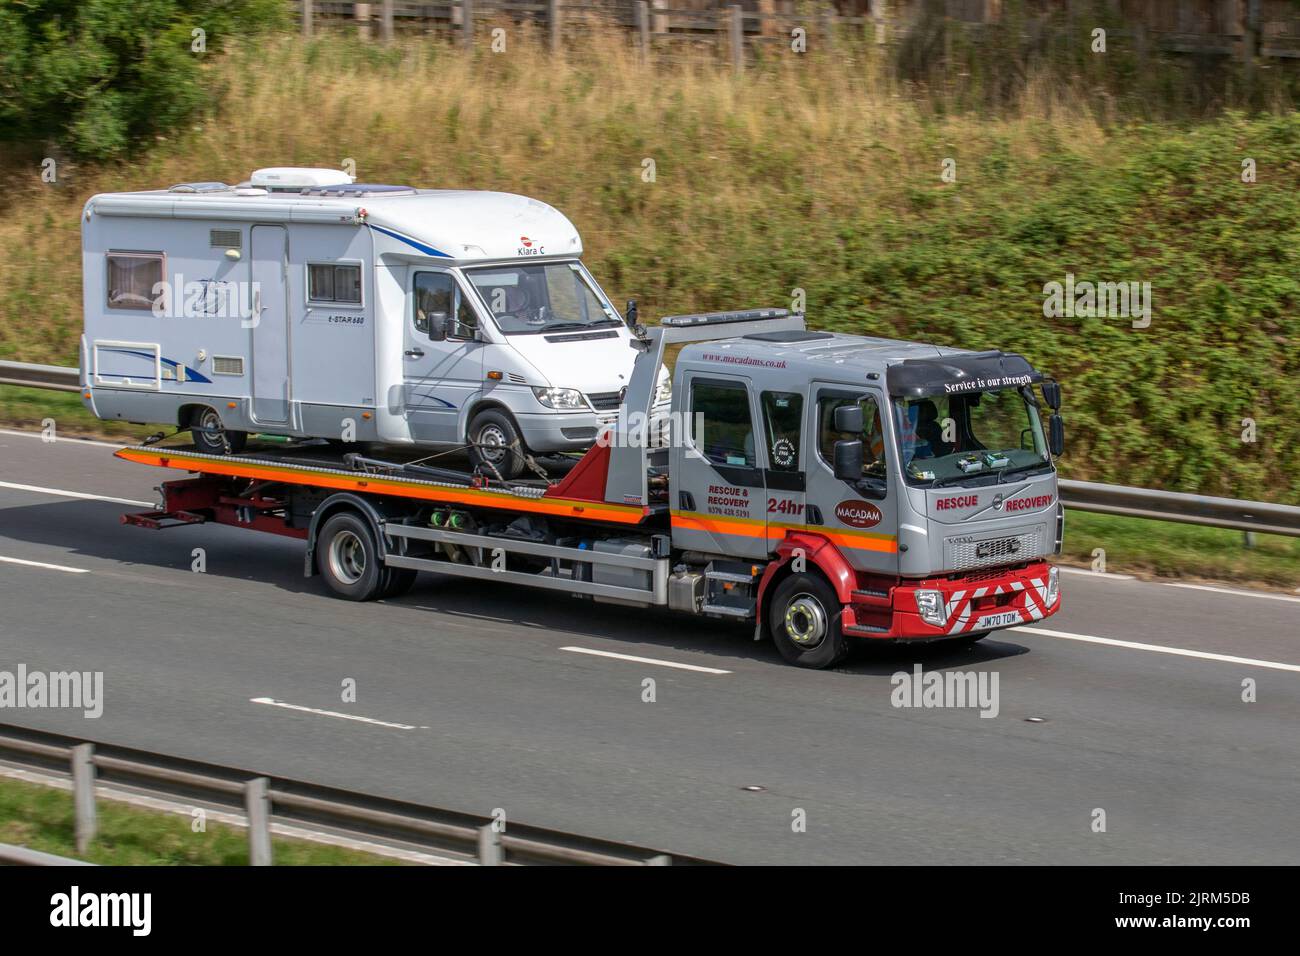 John Macadam & Son Rescue Ltd, 24 Hour Roadside Assistance & Car Rescue. 2020 Volvo FL816 4x2 Crew cab flatbed lorry, 24hr roadside emergency rescue. Recovery vehicle carrying broken down caravan; travelling on the M6 motorway, UK Stock Photo